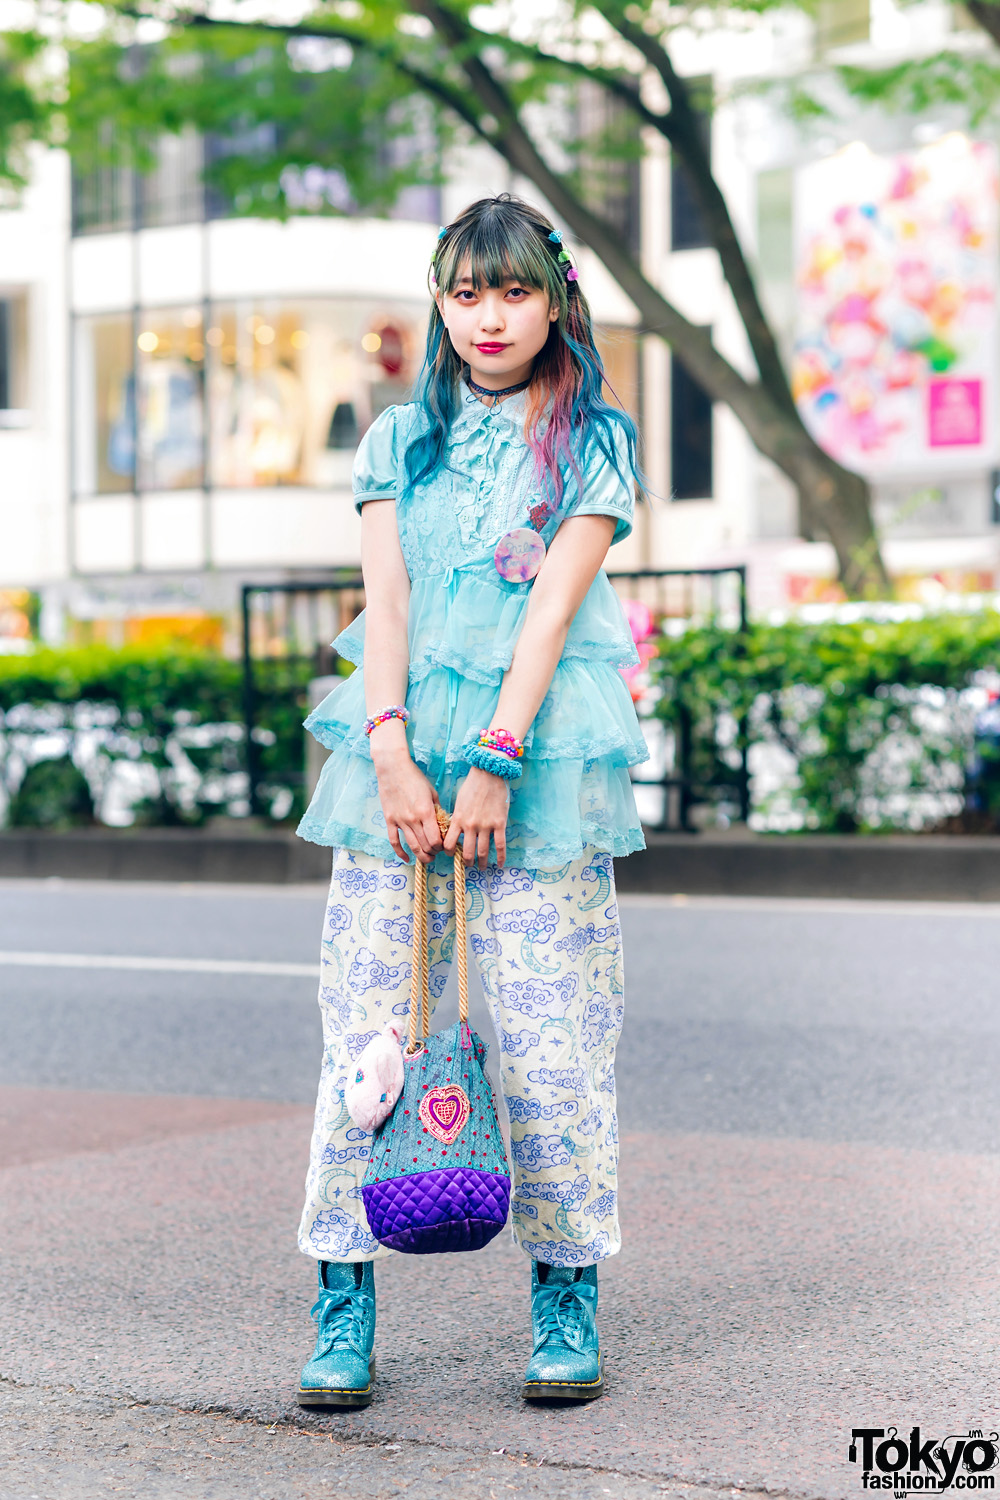 Multicolored Hair, Algonquins Tiered Blouse, Cloud Print Pants, Quilted Bag, 6%DokiDoki & Dr. Martens Glitter Boots